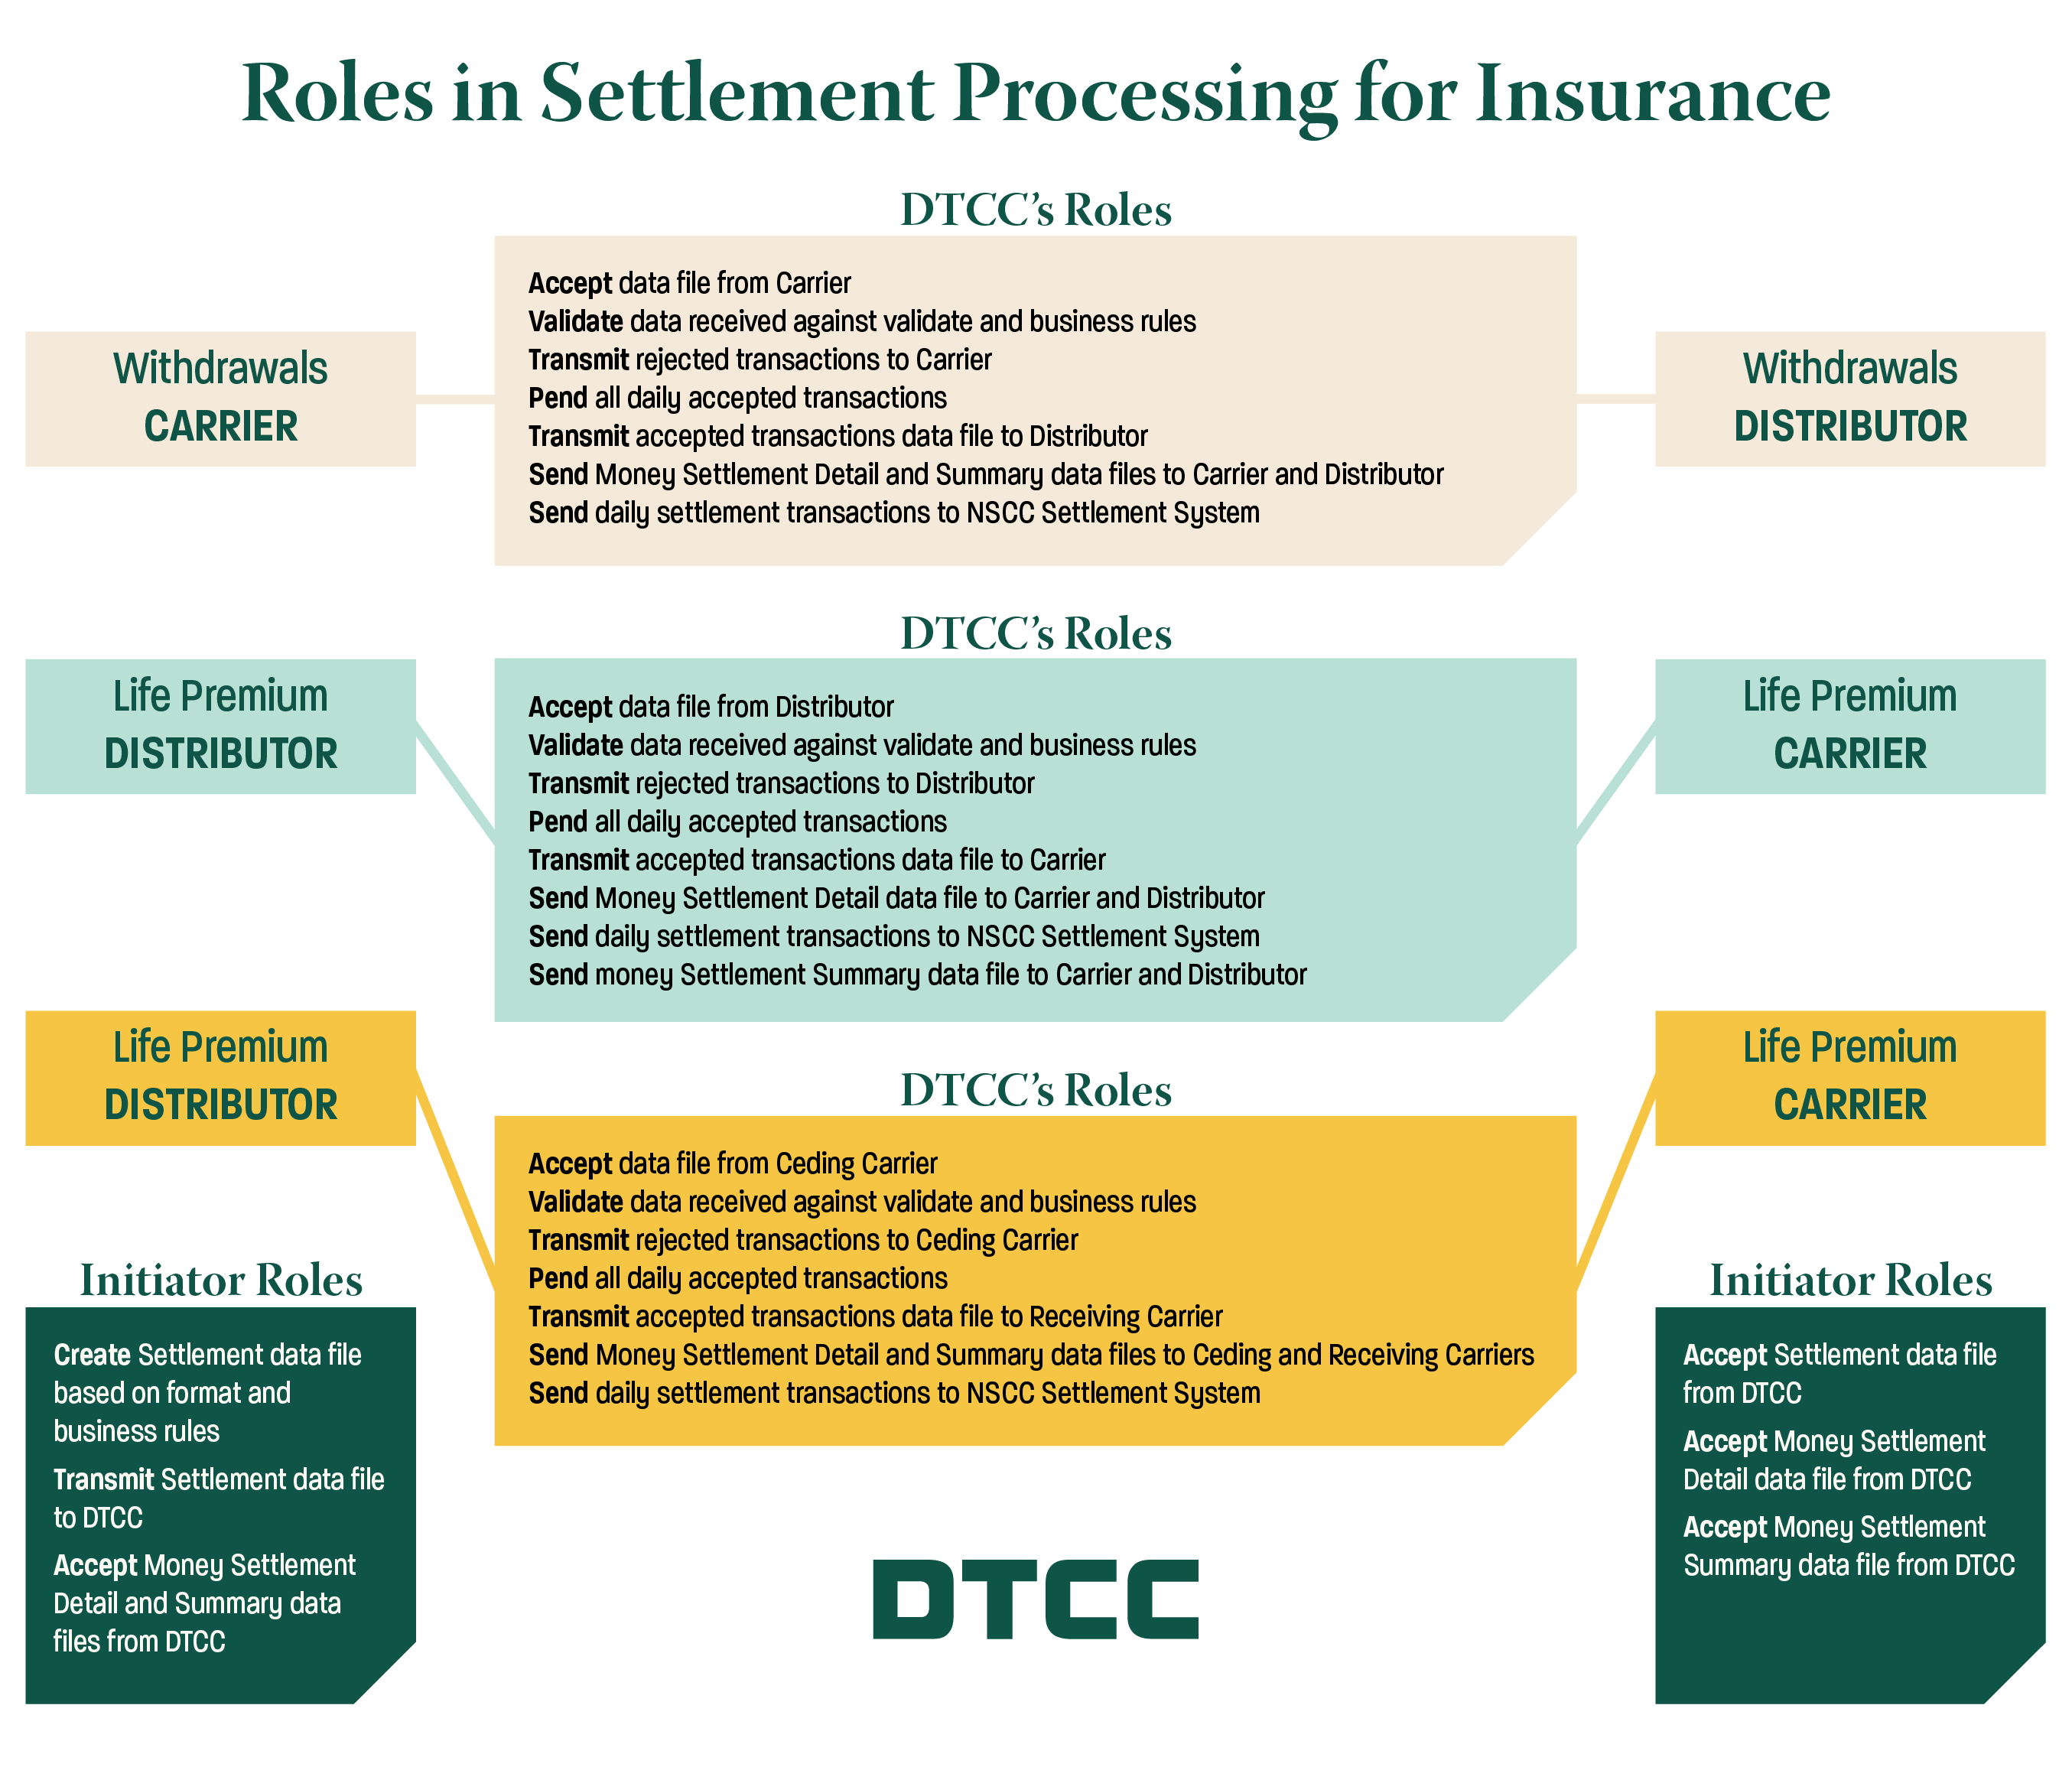 Roles in Settlement Processing for Insurance